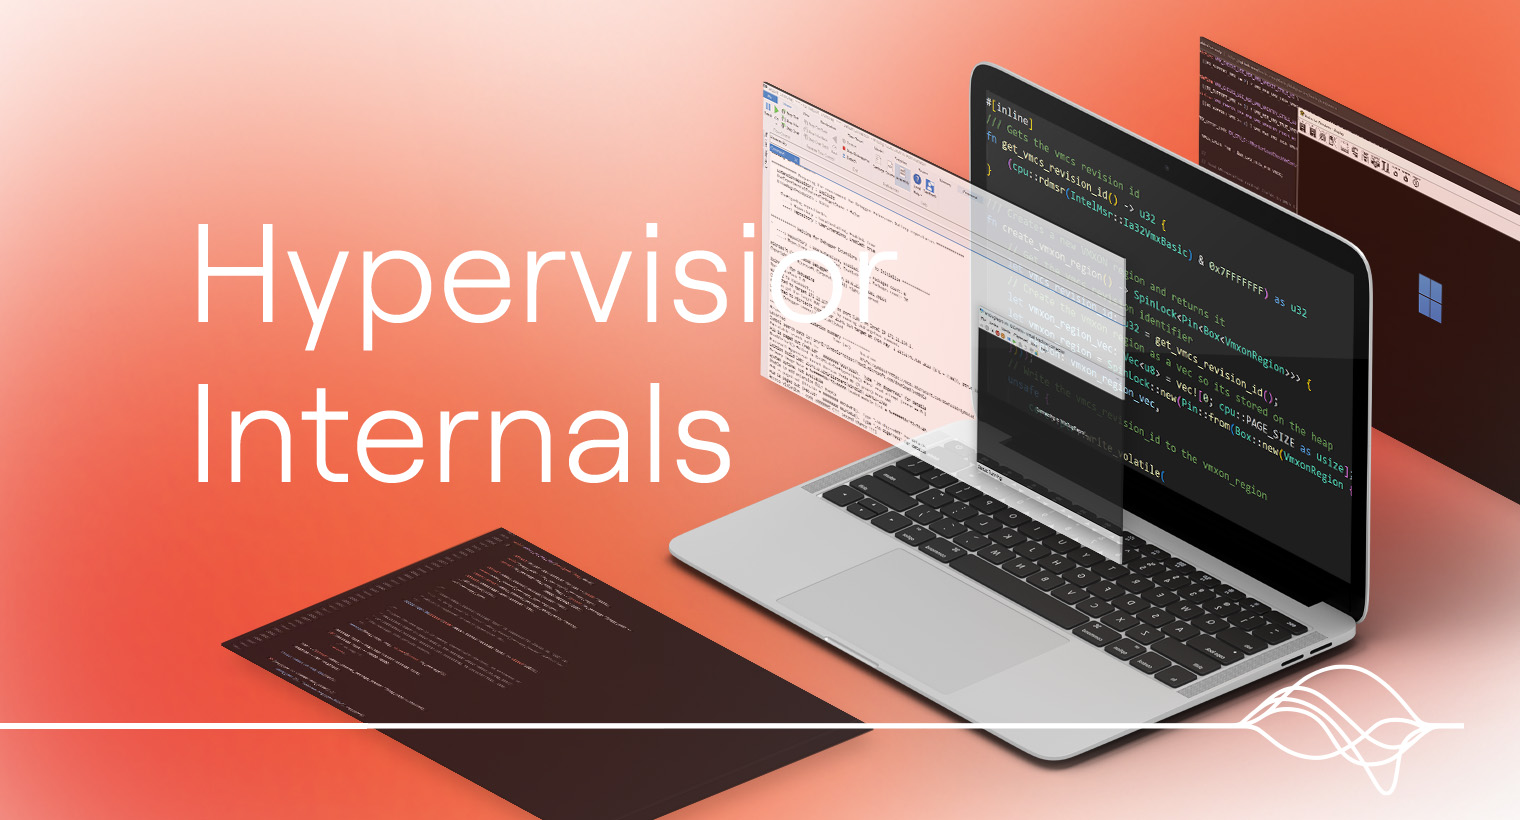 Hypervisor Internals 1 | Signal Labs | Advanced Offensive Cybersecurity Training | Self-Paced Trainings | Live Trainings | Virtual Trainings | Custom Private Trainings for Business